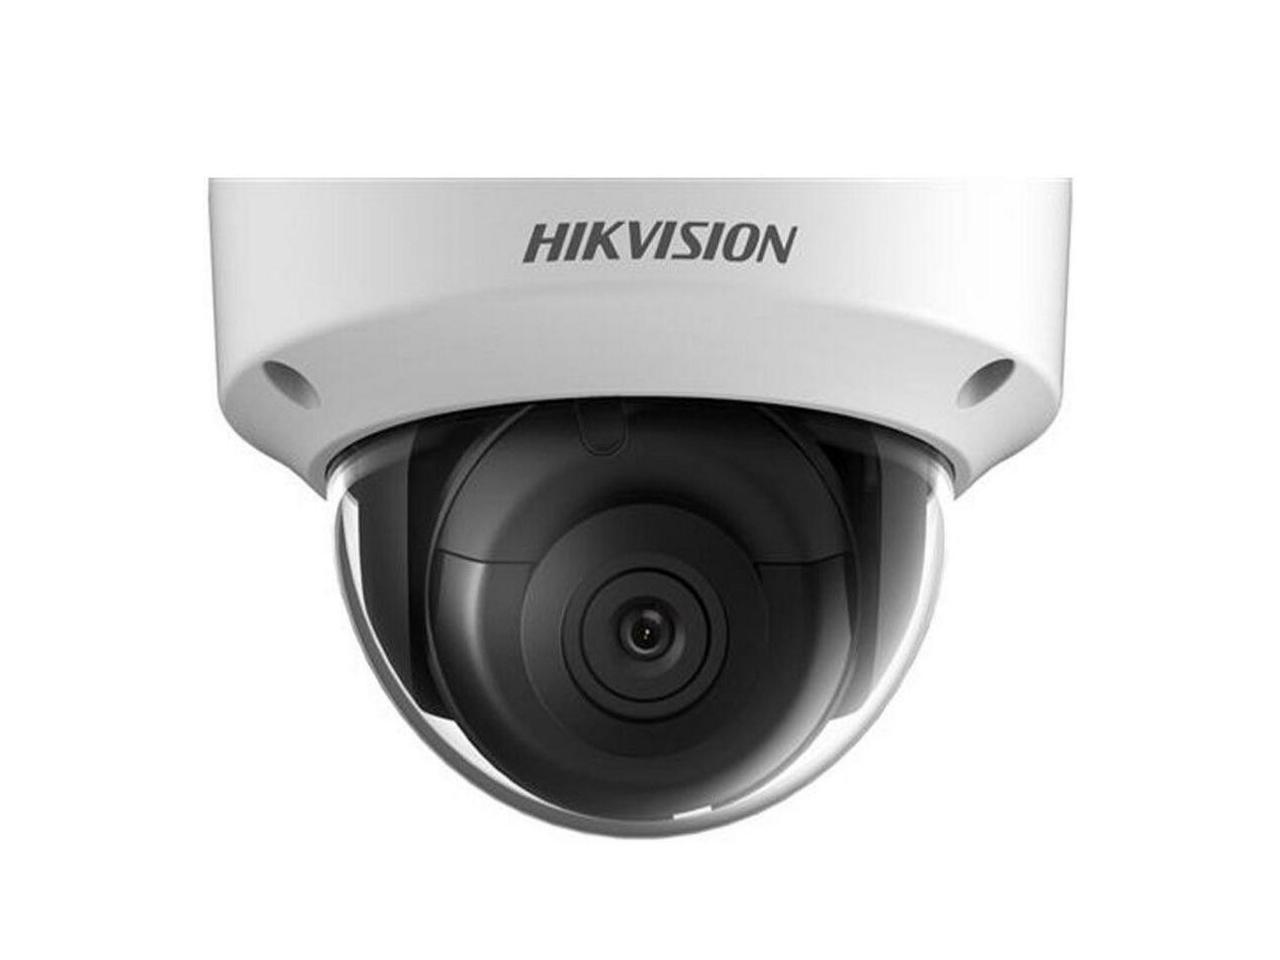 Hikvision DS-2CD1143G0-I 4.0 MP IR Network Dome Camera